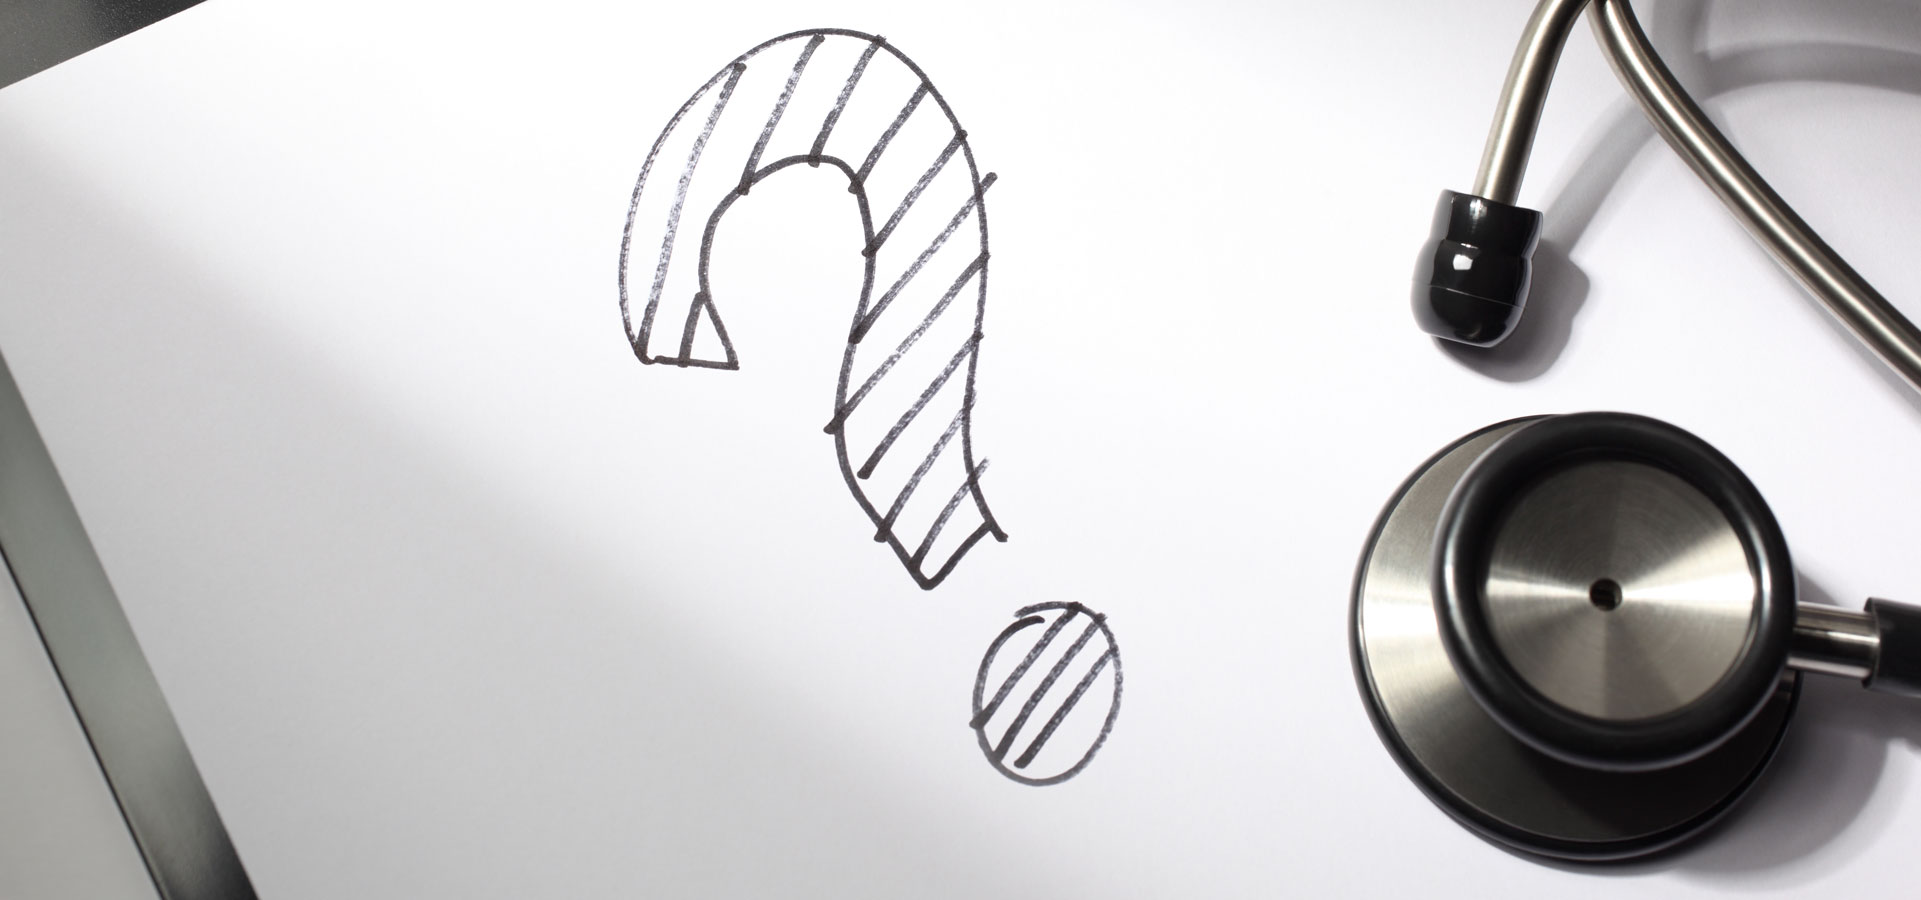 question mark drawn in marker on white paper next to stethoscope